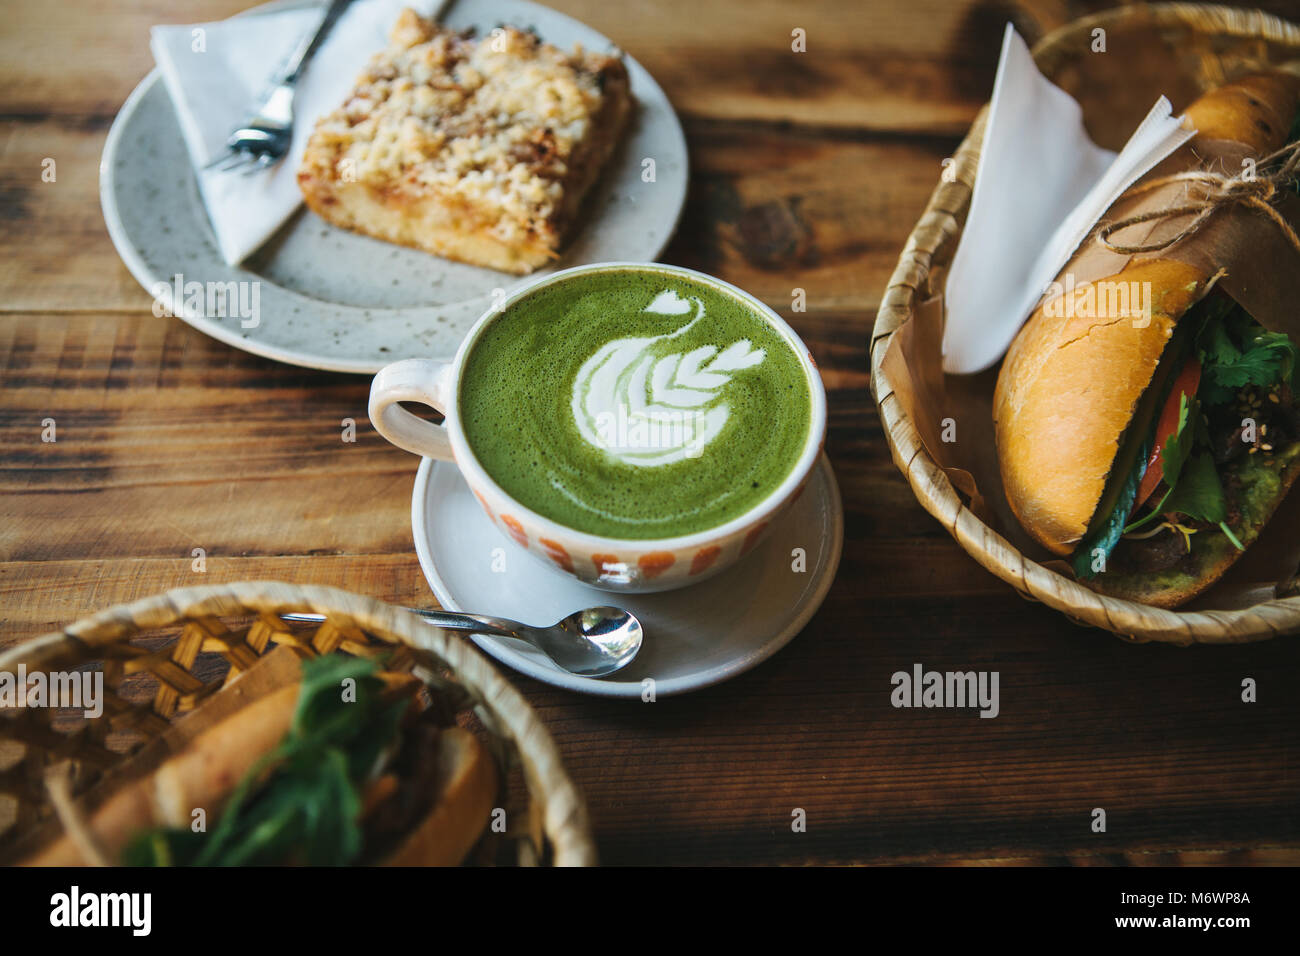 Healthy breakfast in the restaurant: cup of green tea with milk, dessert and sandwiches with vegetables and herbs on wooden table. Stock Photo